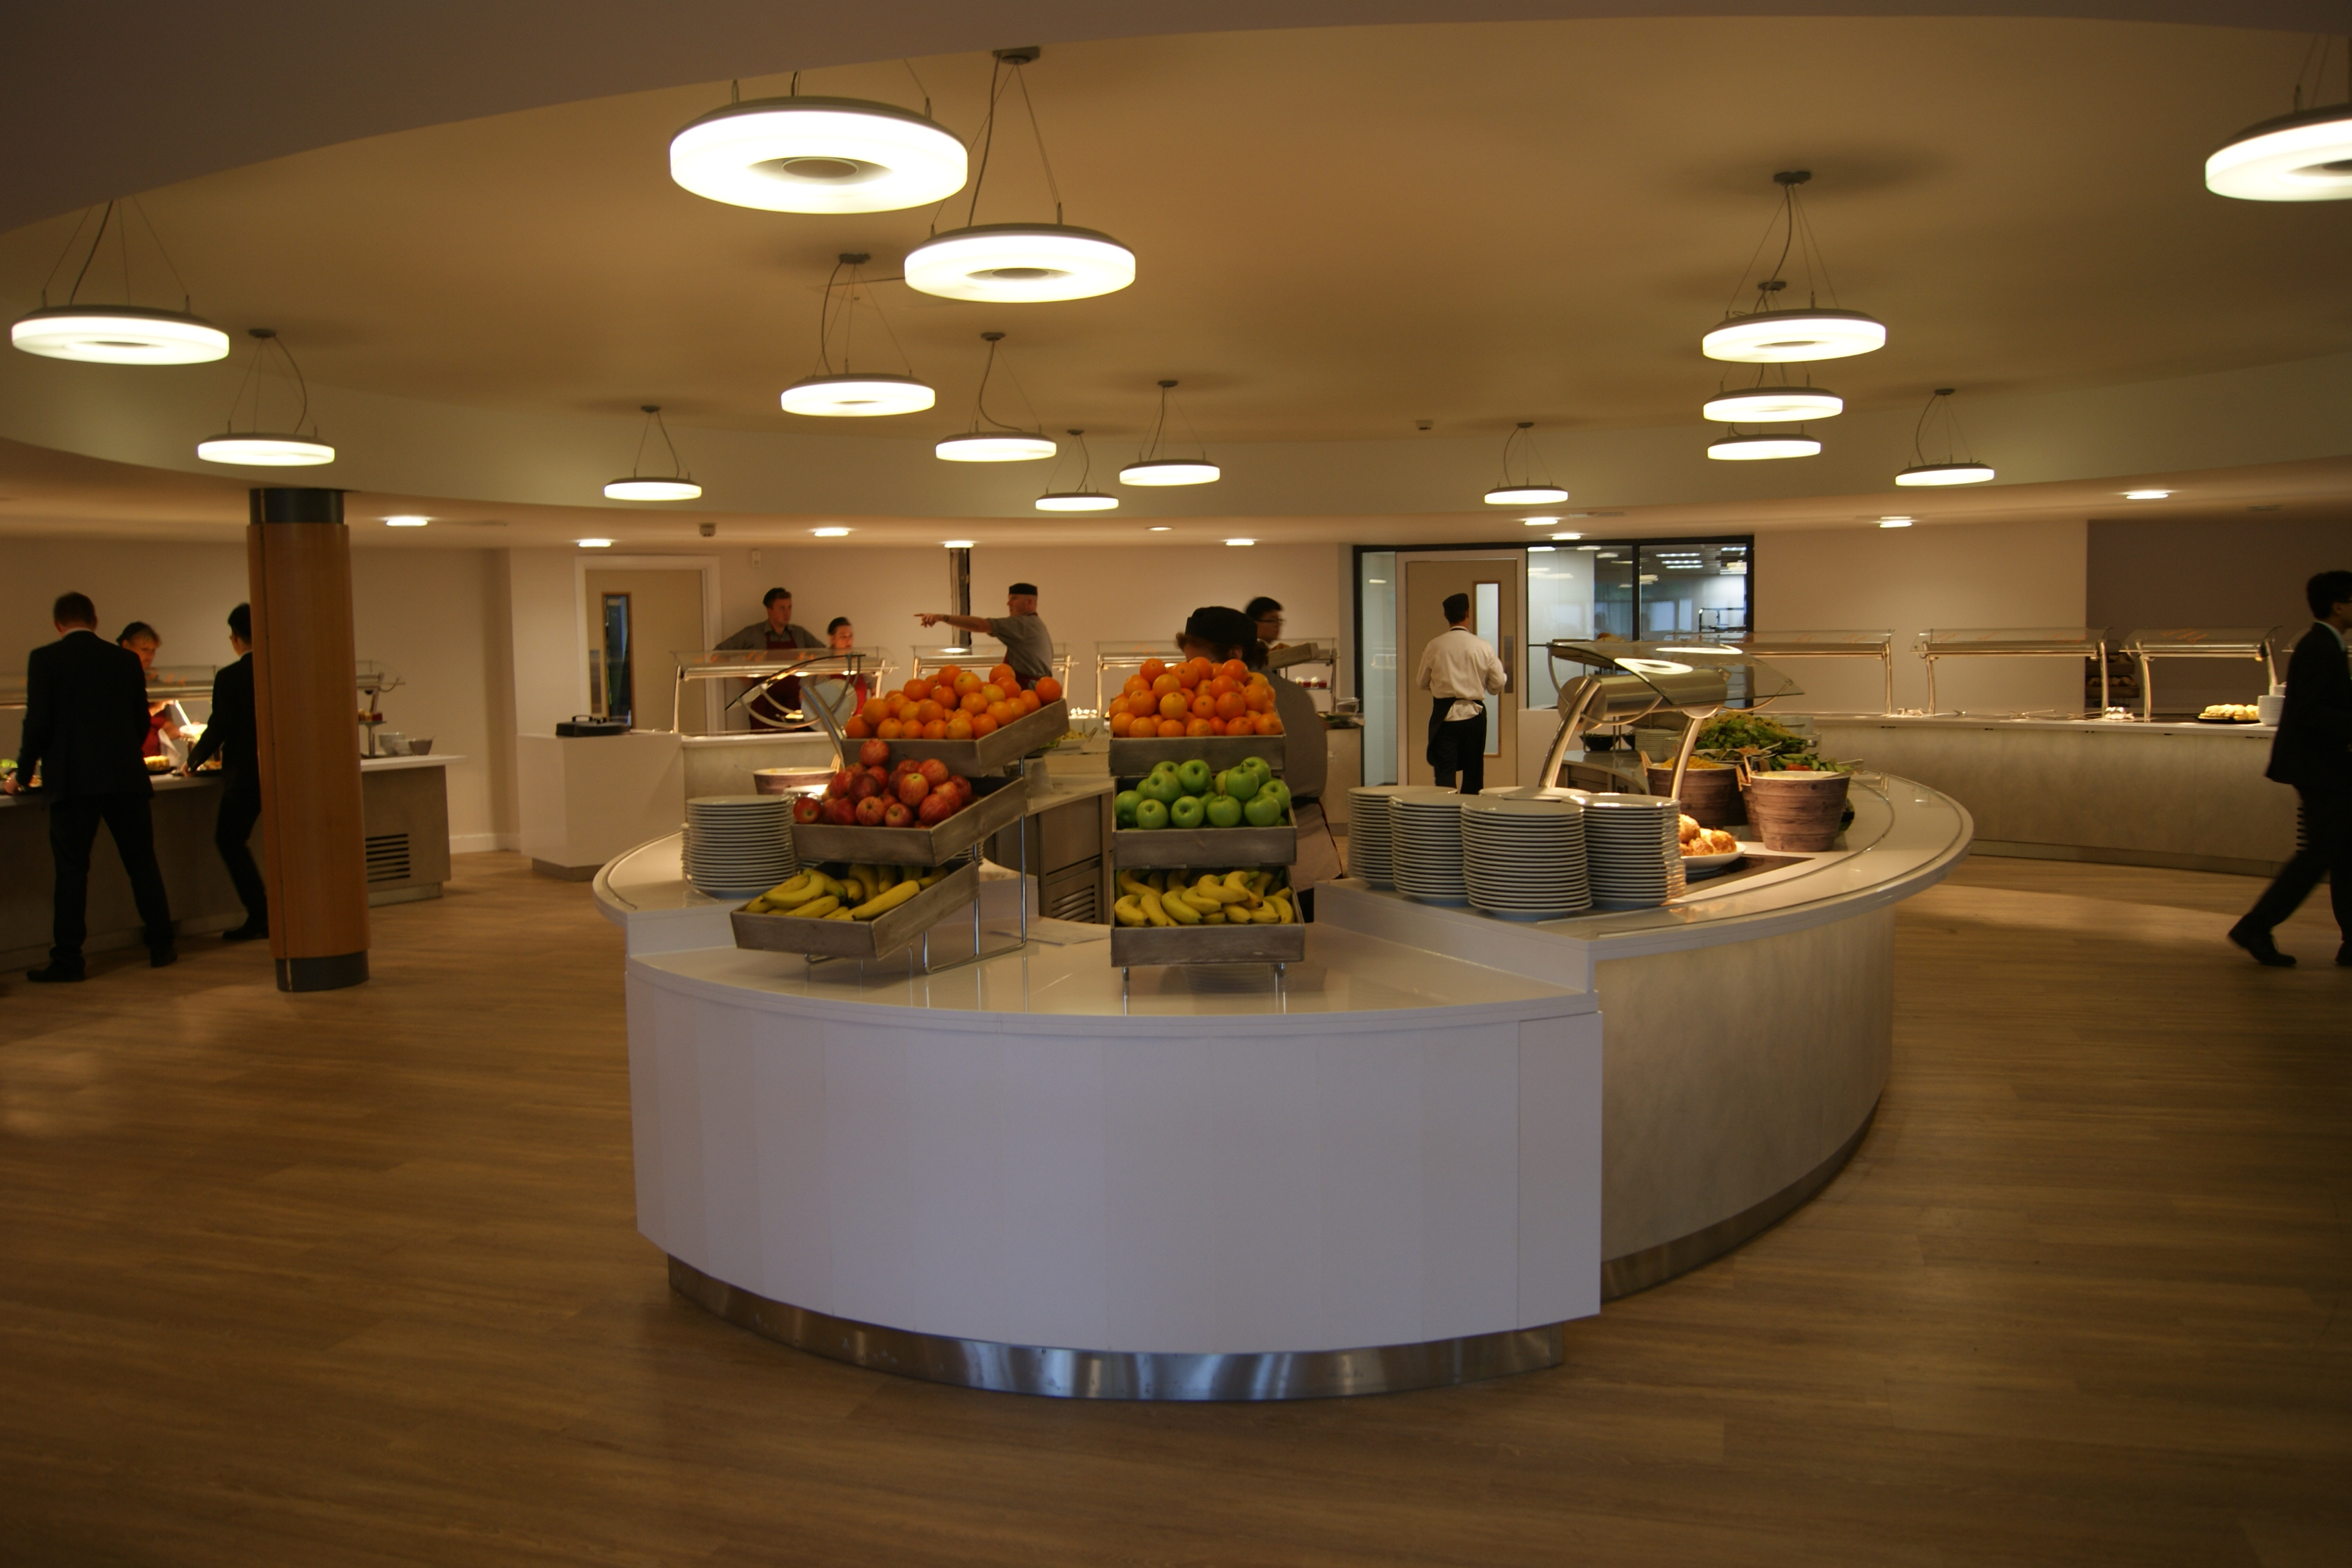 The Senior School Dining Hall which opened after refurbishment in September 2015